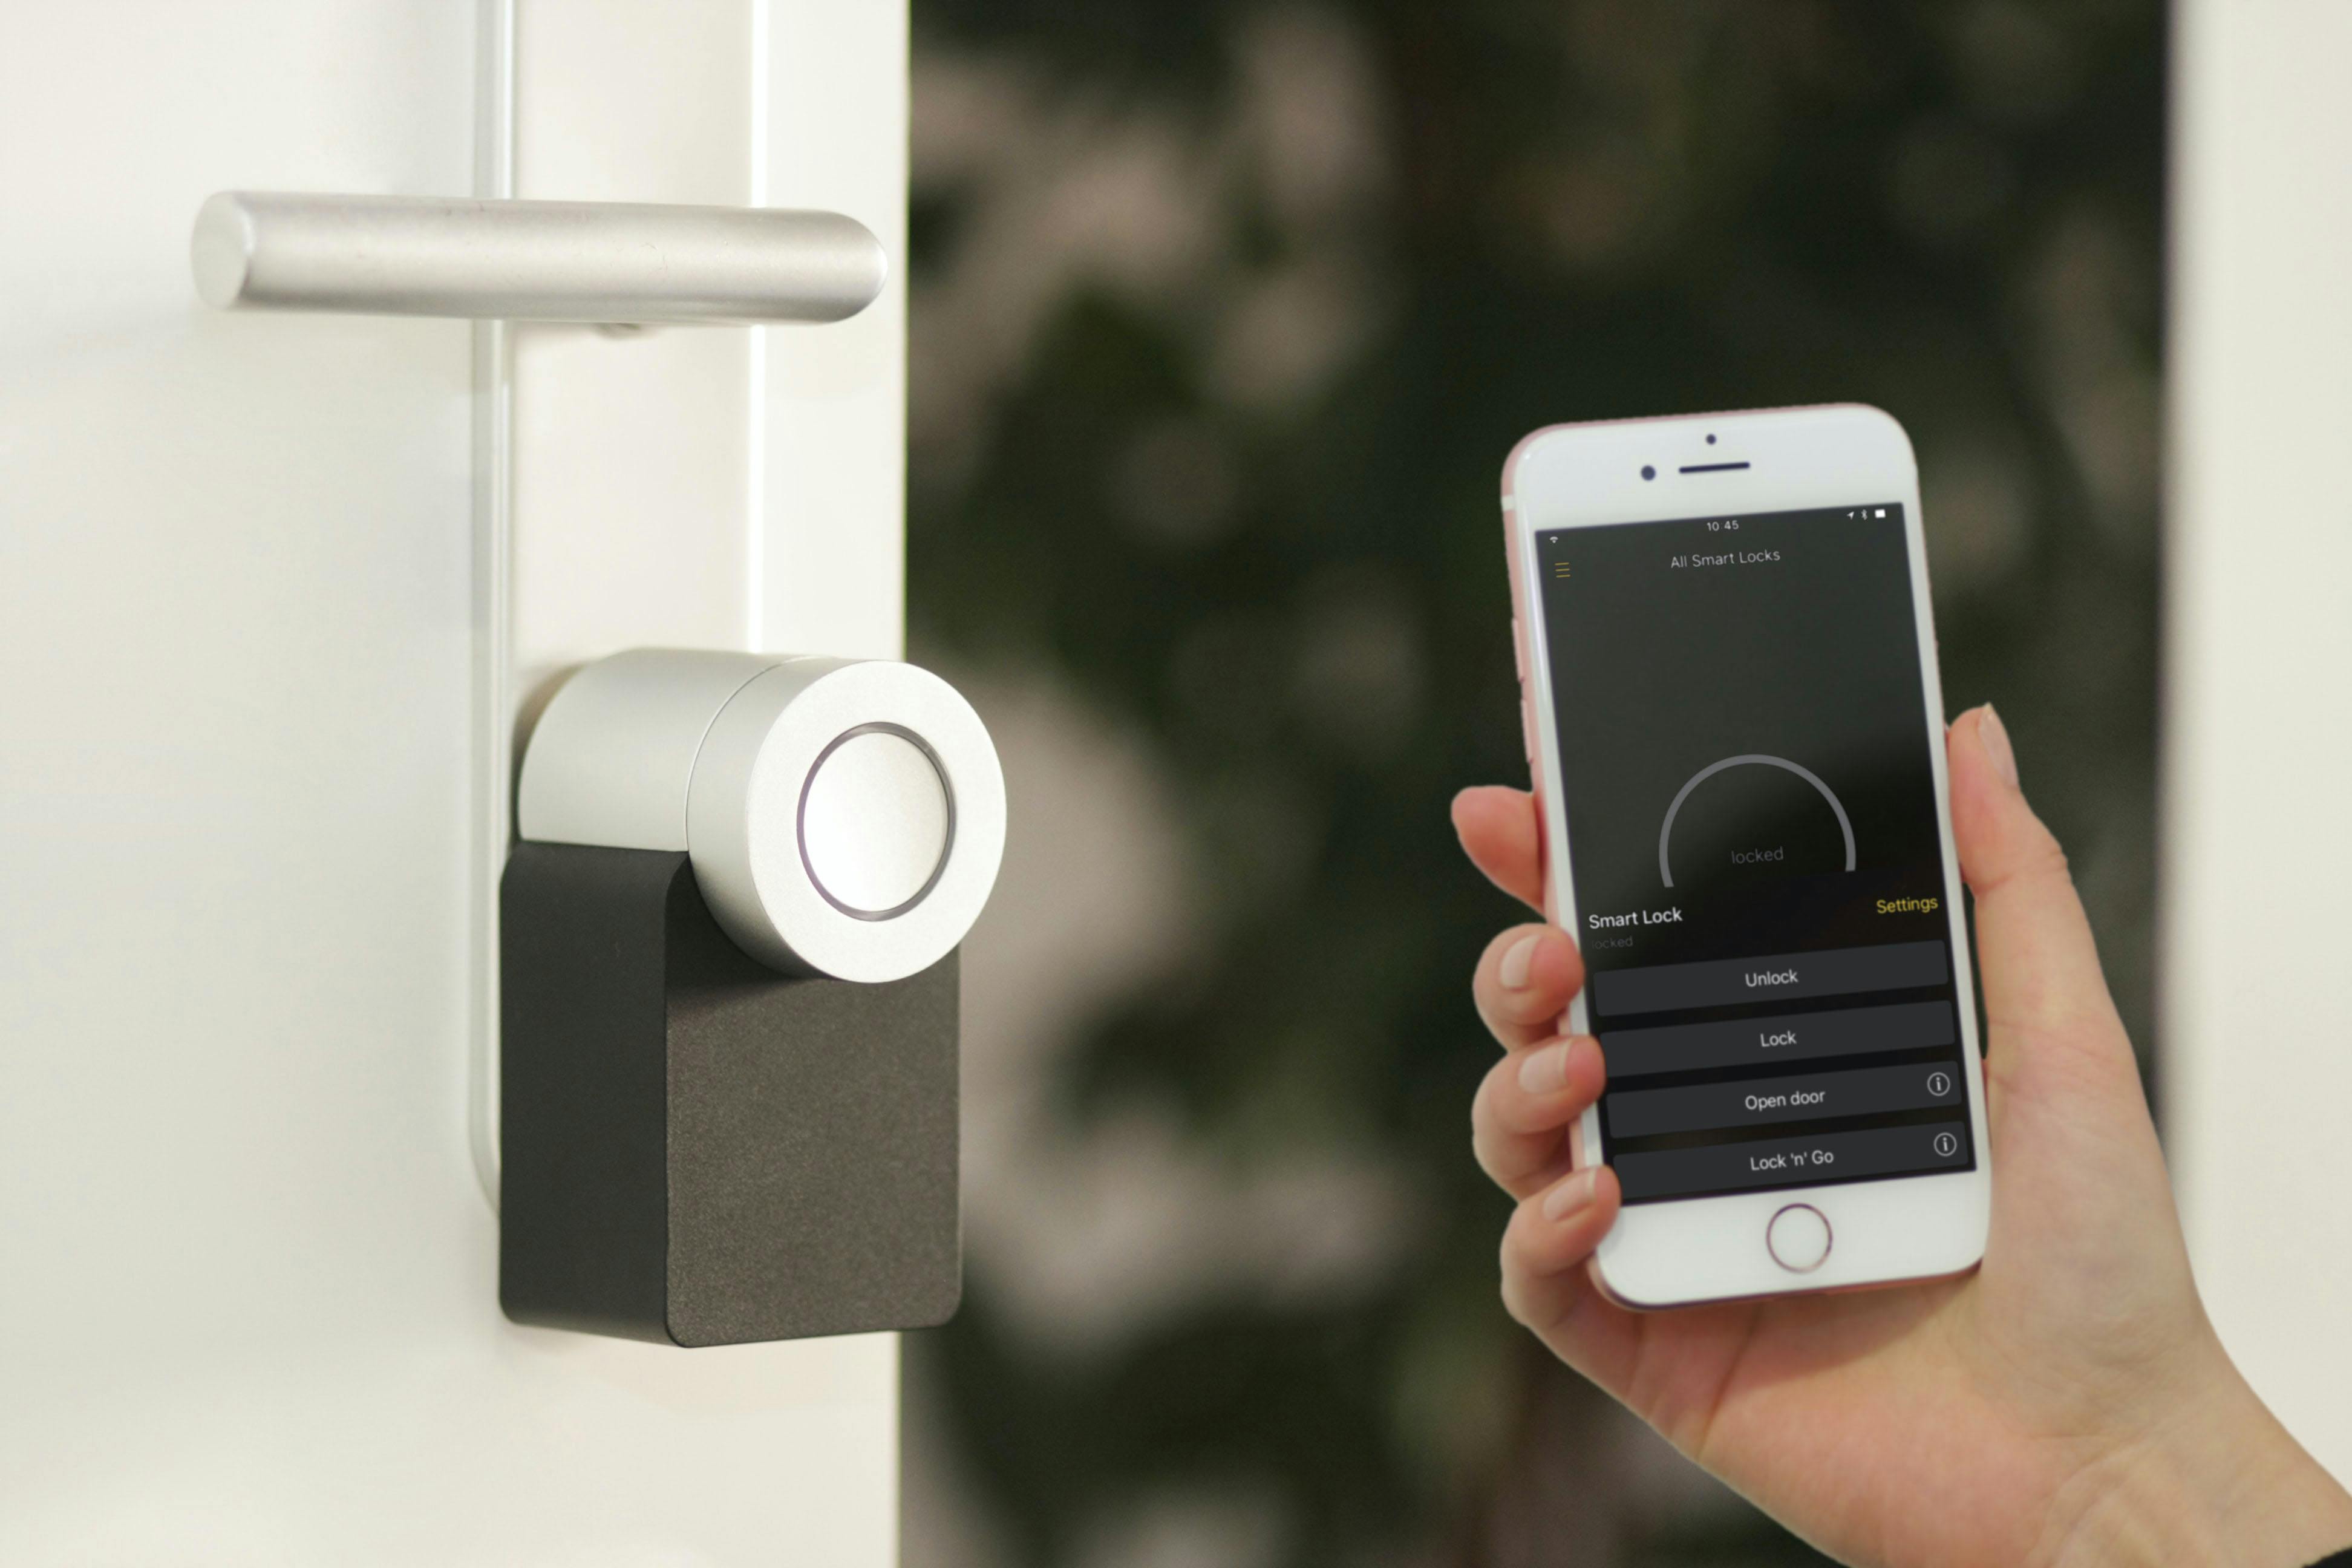 Smart Lock Not Working? Here’s What to Do